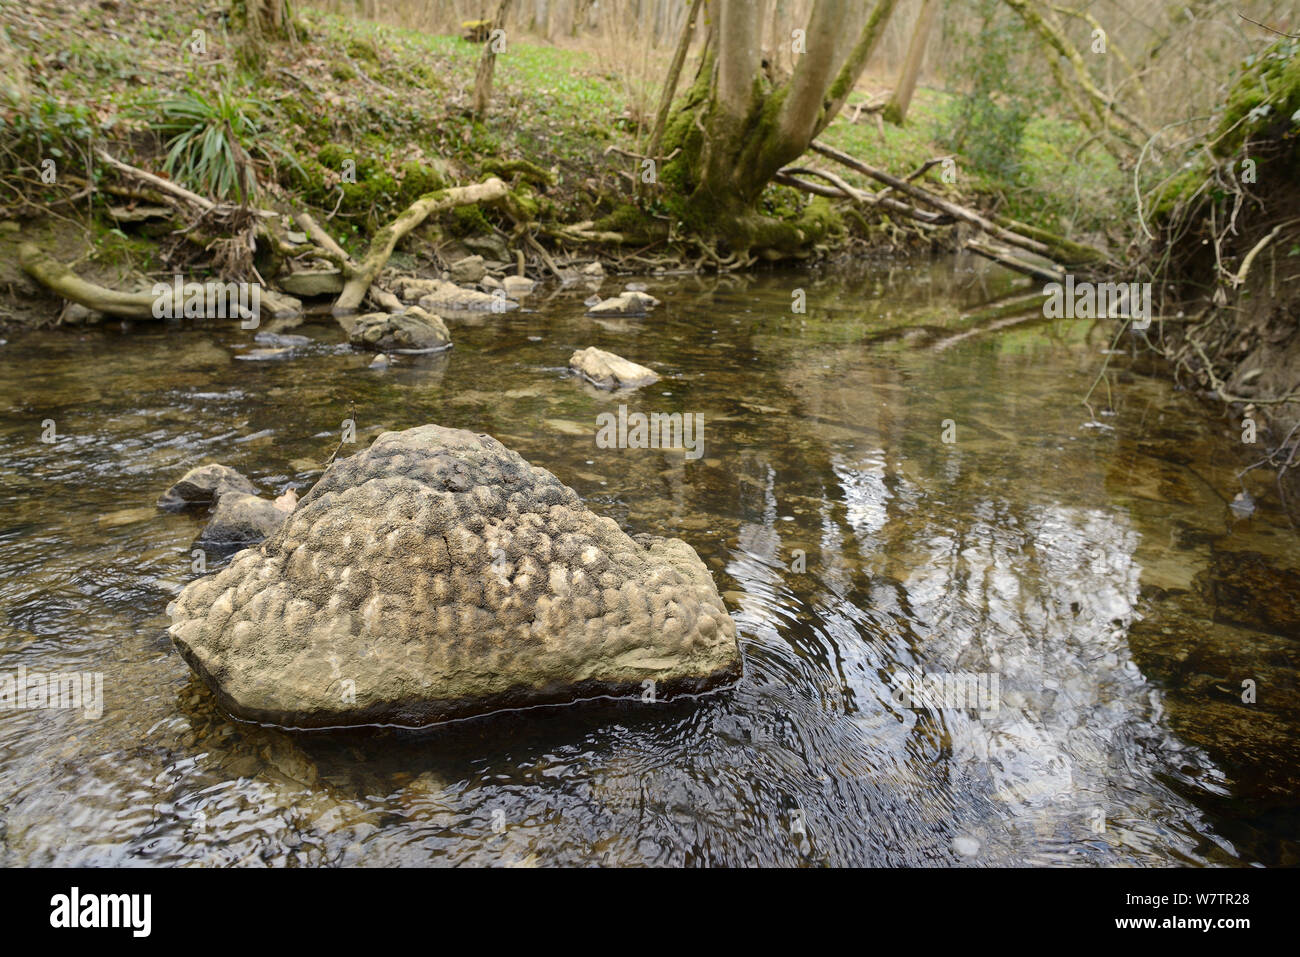 Cotham marble / Landscape marble boulder, a tough limestone with attractive landscape-like patterns when polished, formed from fossilised cyanobacterial stromatolites, exposed by river action, Lower woods, Gloucestershire, UK, March. Stock Photo